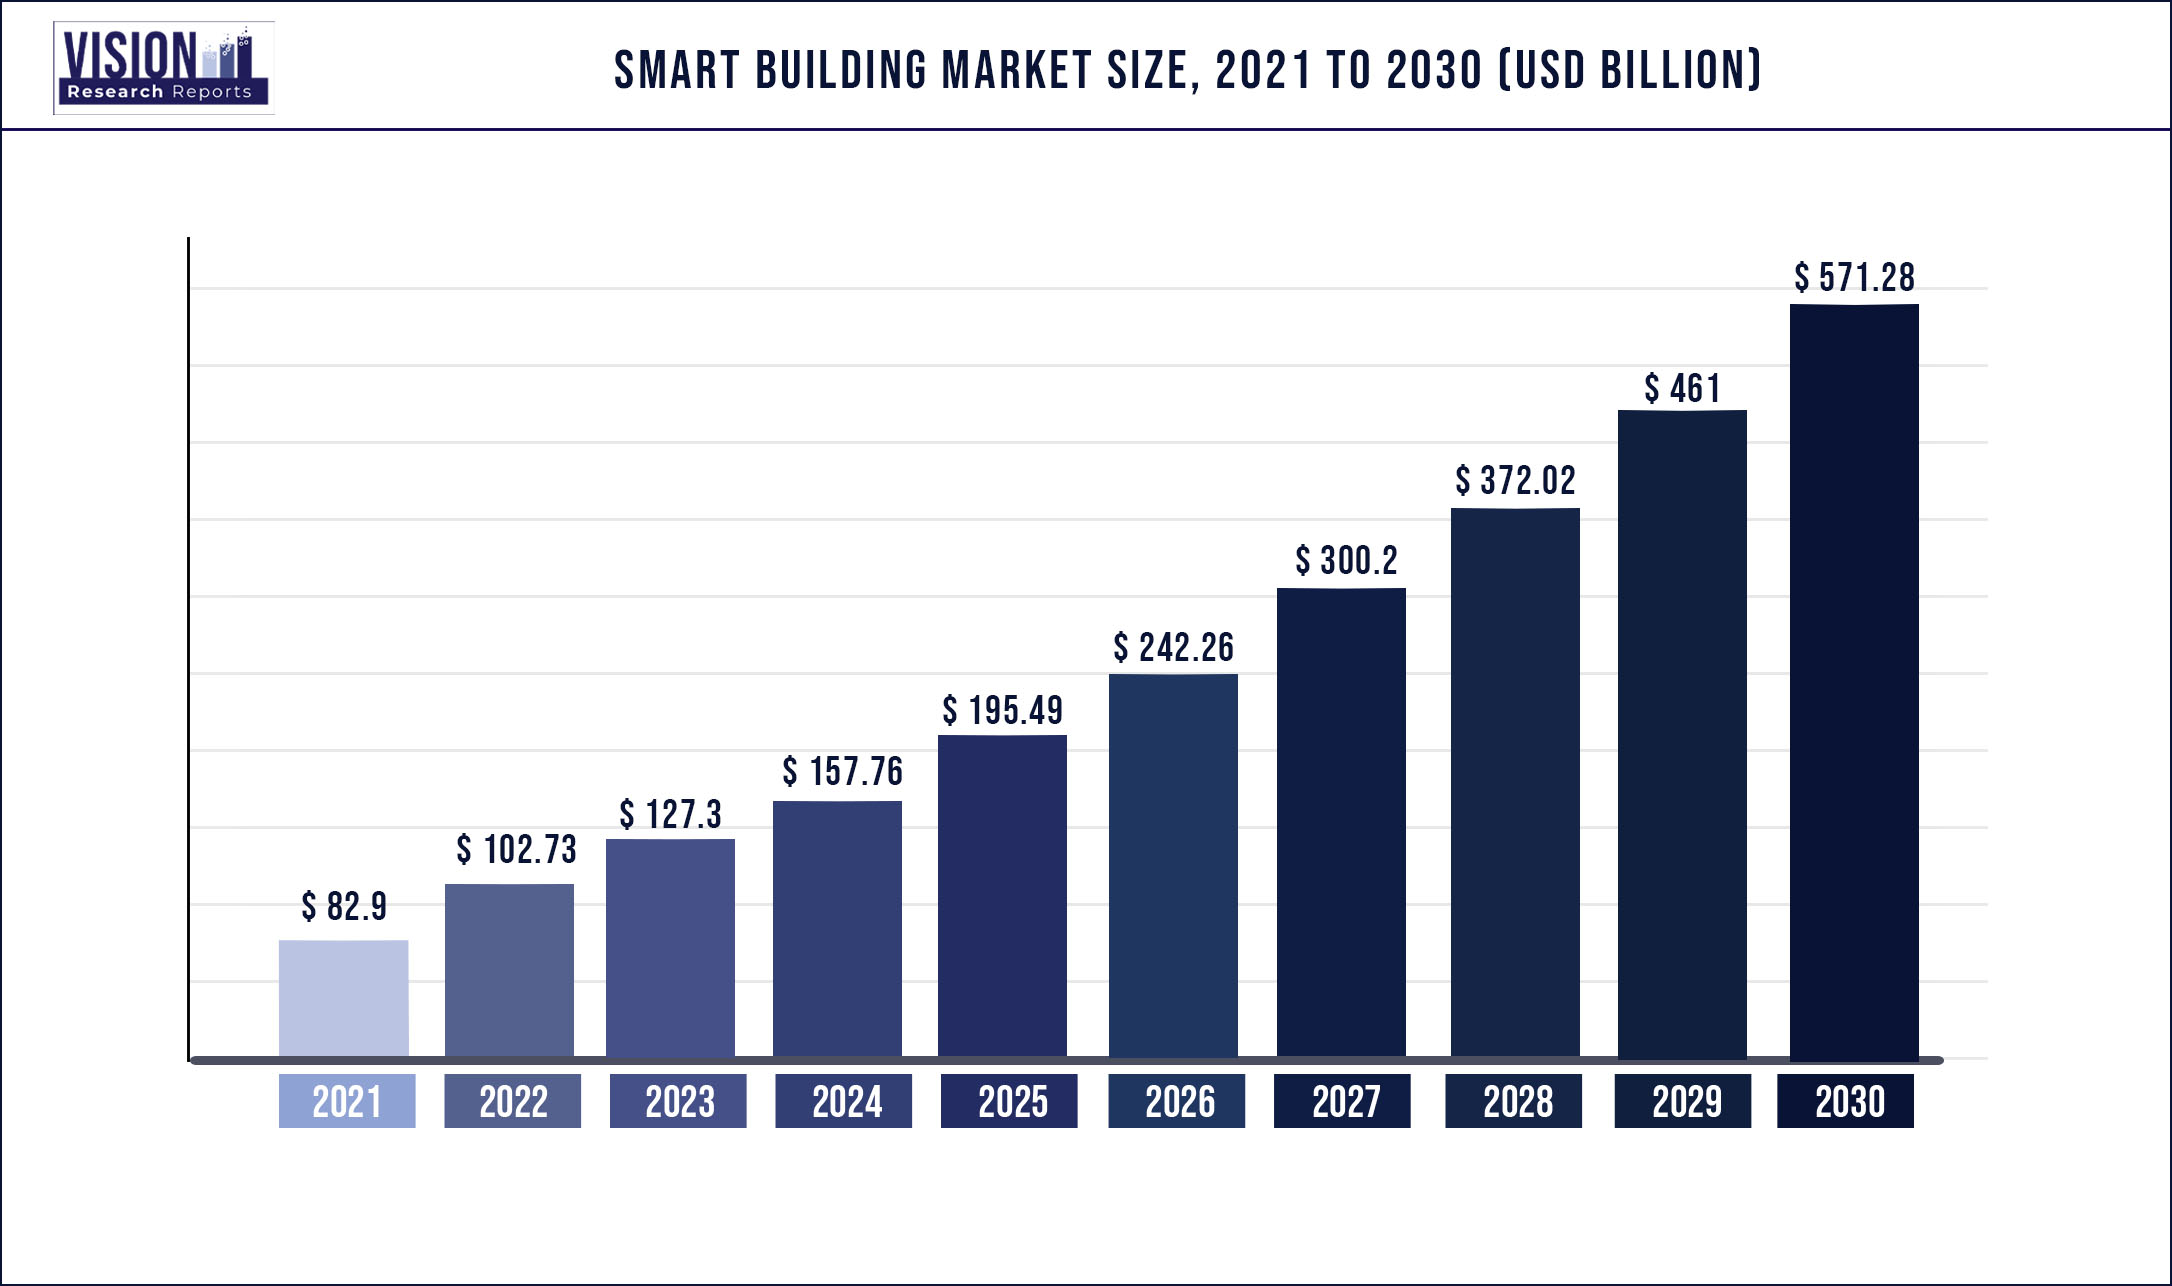 Smart Building Market Size 2021 to 2030